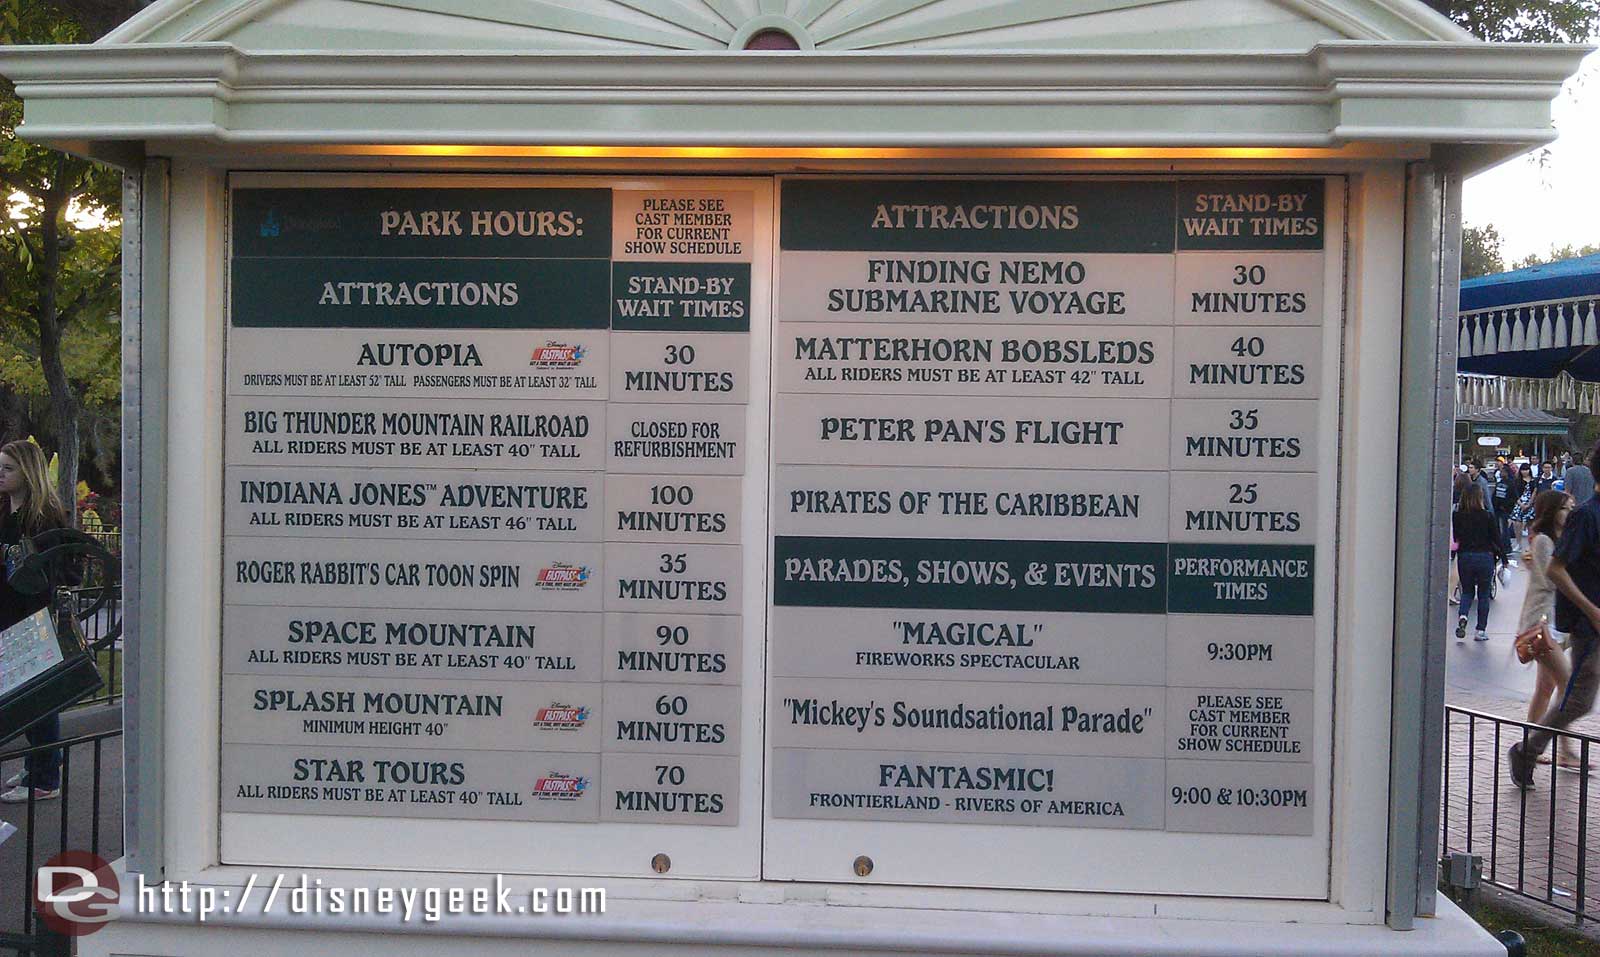 One last look at the Disneyland wait board before heading out